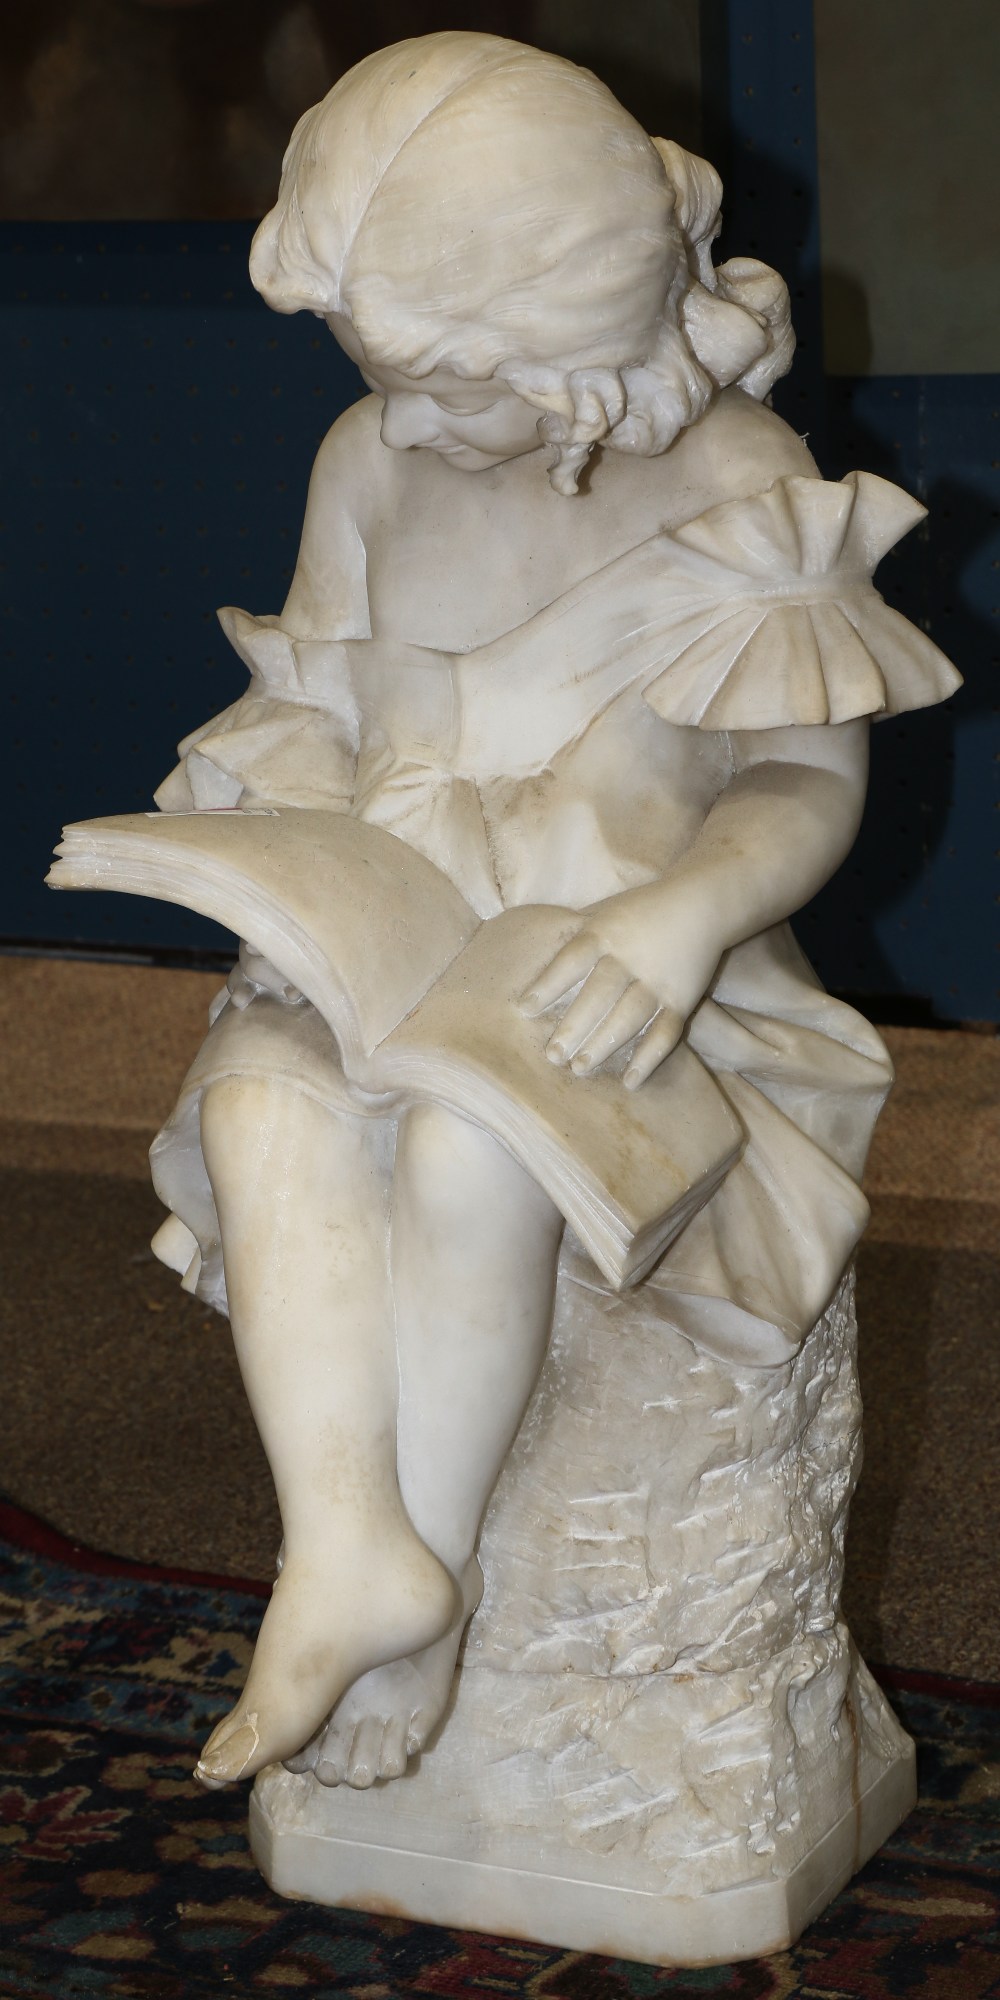 Cristofor Vicari (Italian, 1846-1913) marble figural sculpture, depicting a young girl reading, - Image 2 of 5